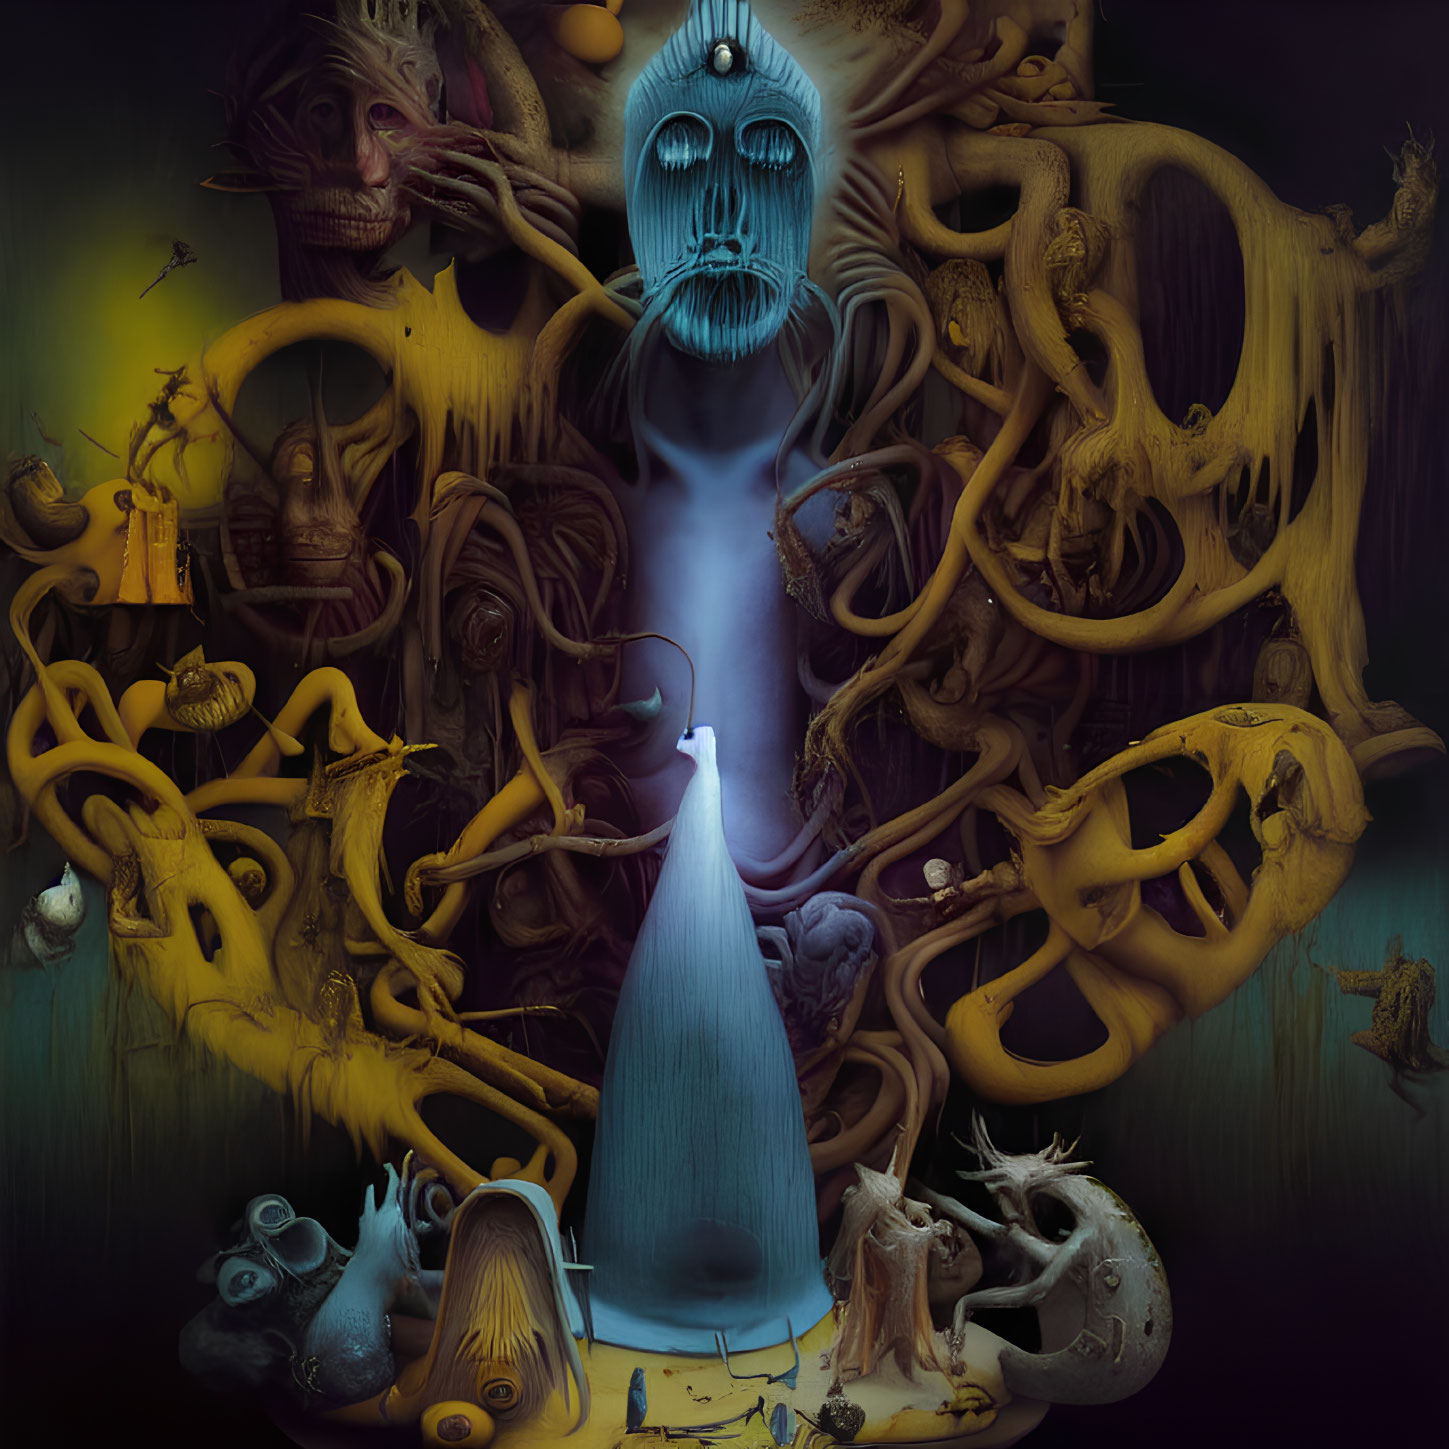 Dark surreal painting with blue figure, twisted roots, bizarre creatures, haunting faces.